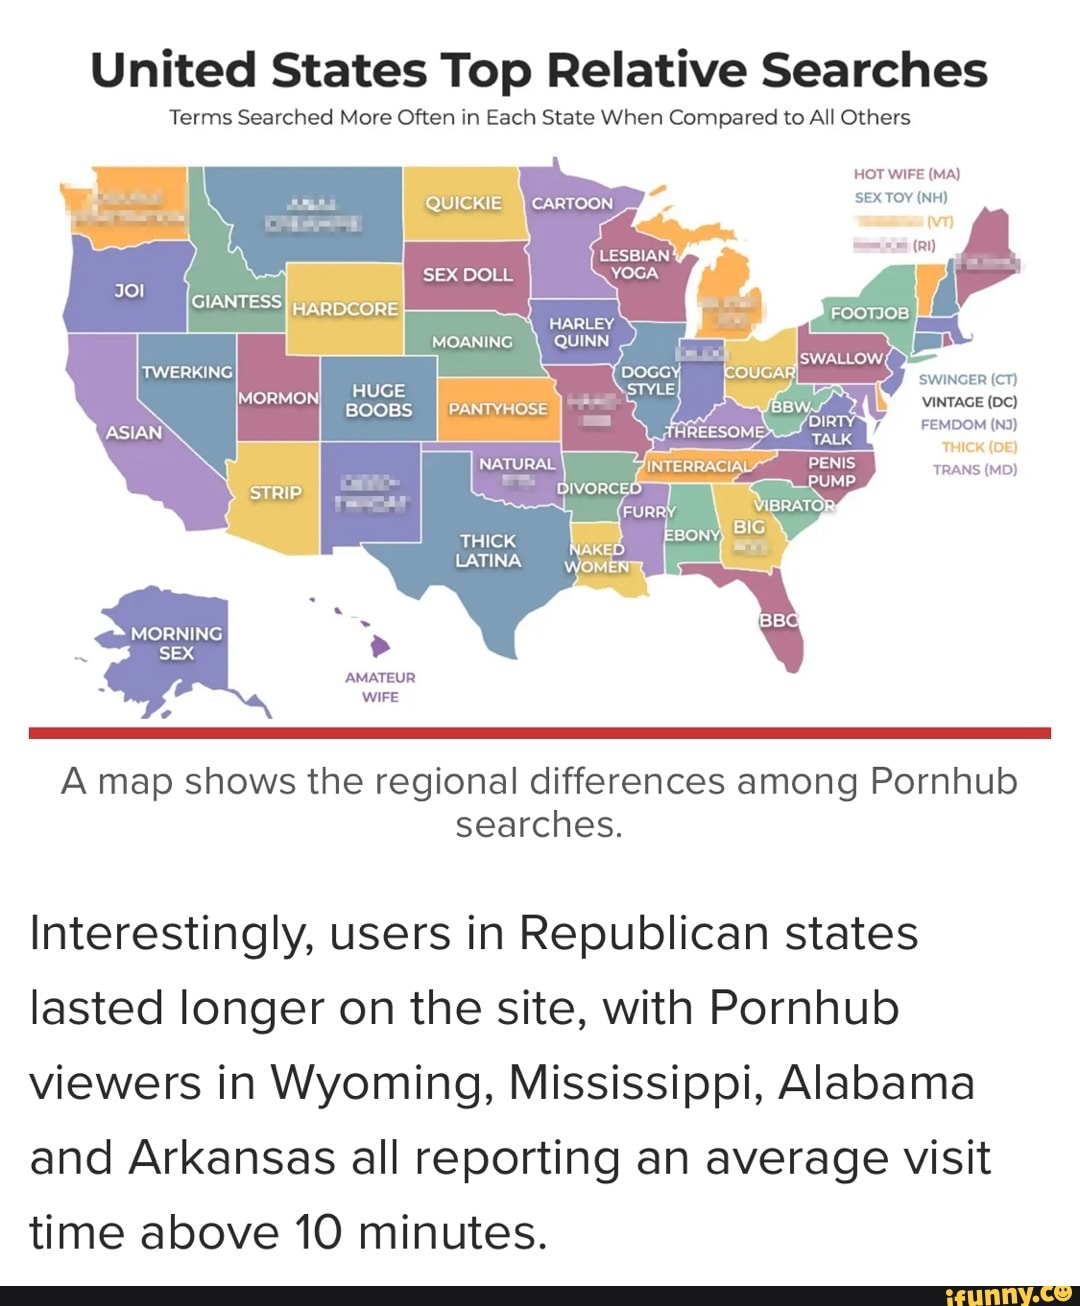 United States Top Relative Searches Terms Searched More Often in Each State When Compared to